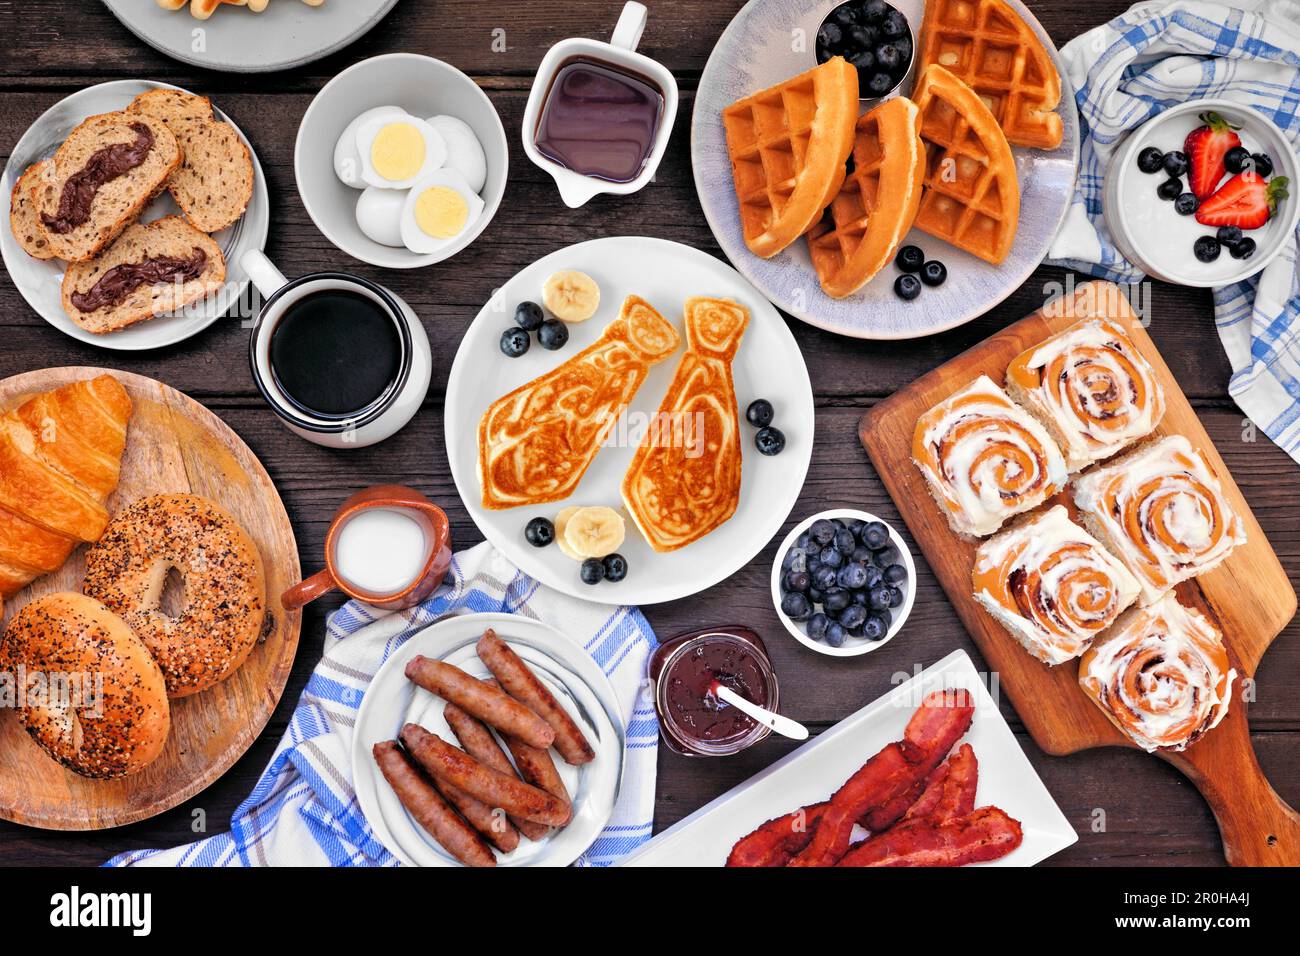 Fathers Day brunch table scene. Above view on a dark wood background. Tie pancakes, mustache toast and a variety of dad themed food. Stock Photo